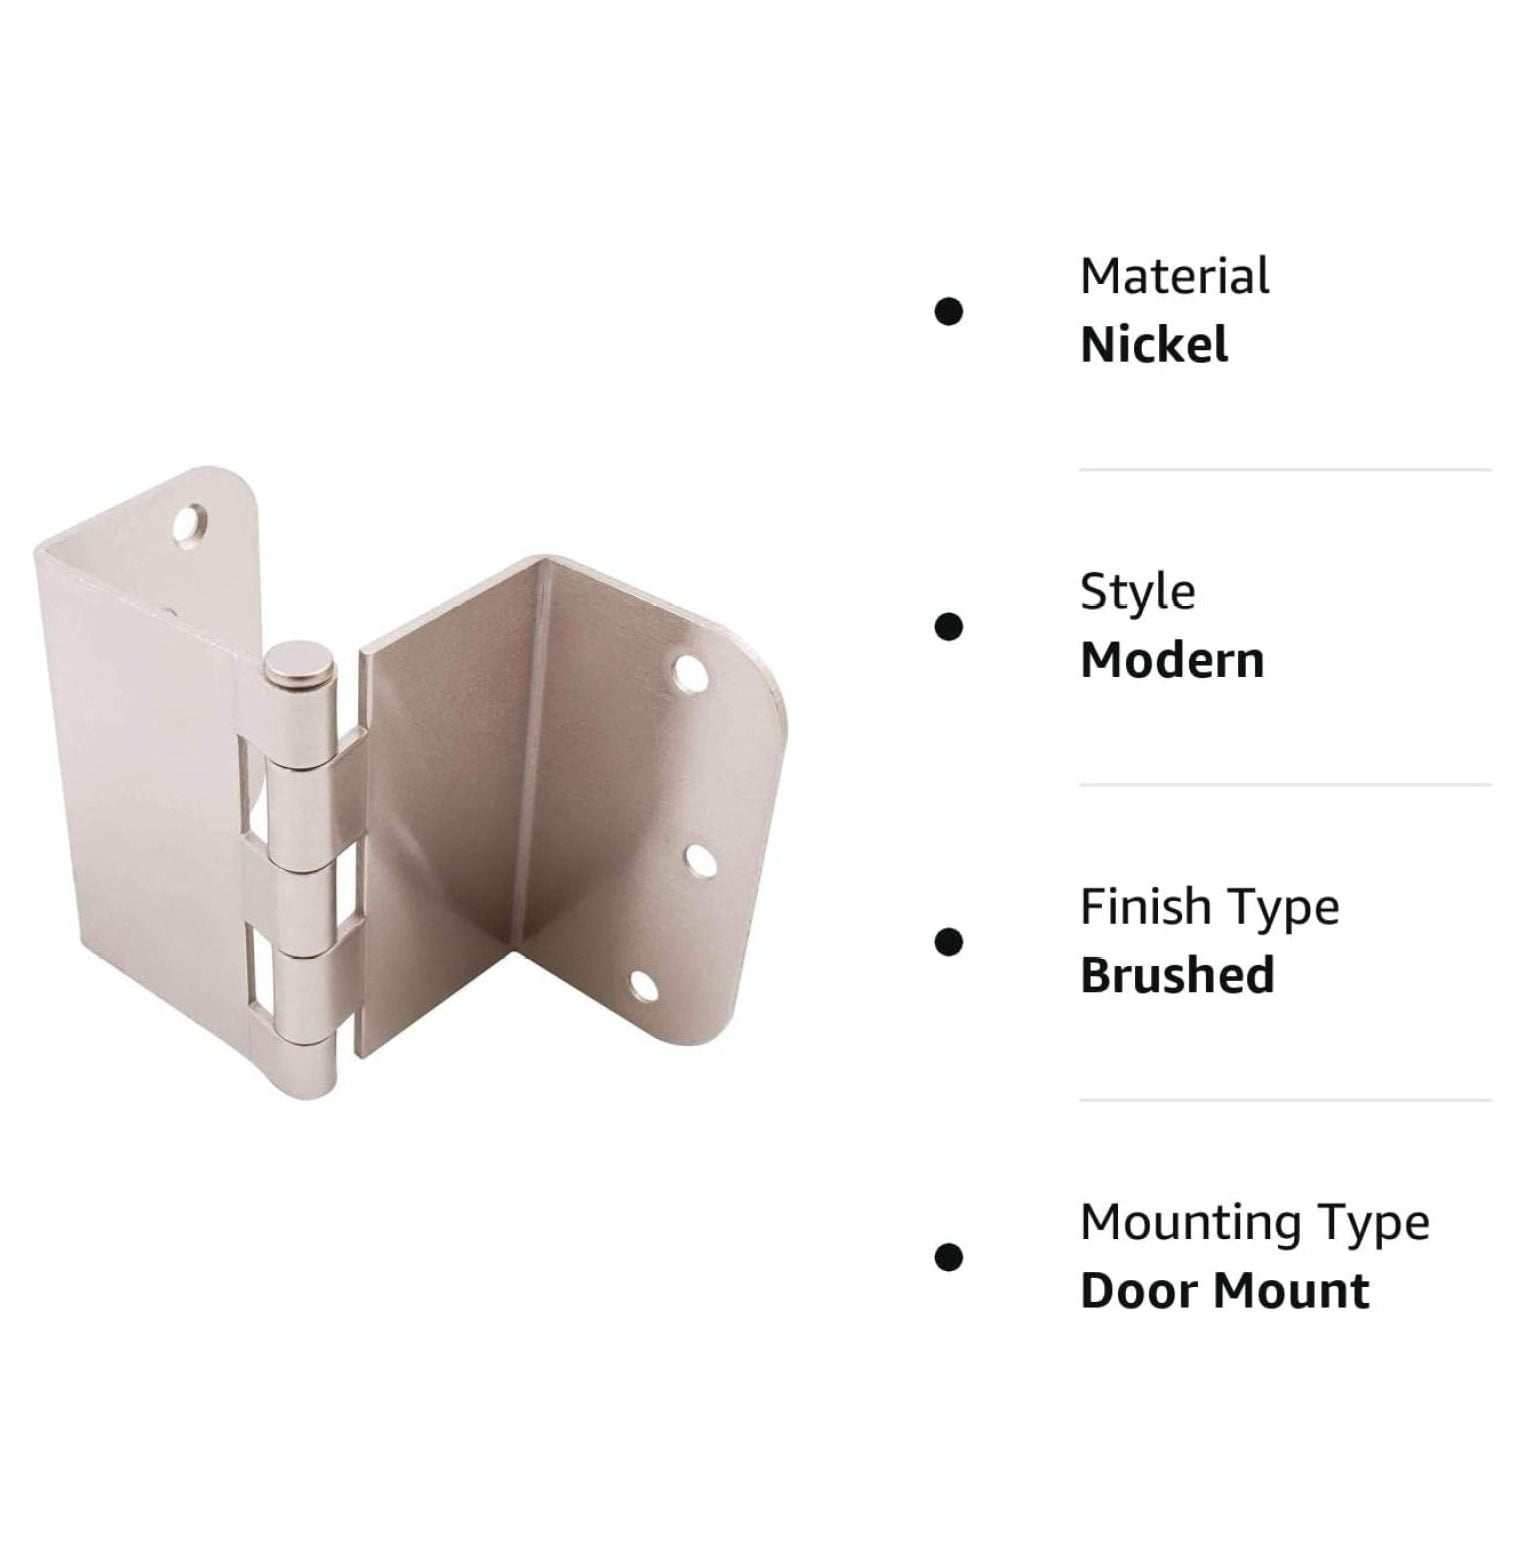 BULYAXIA 3.5 inch Swing Clear Offset Door Hinge, 3-Pack (58 inch , Brushed  ), T2895